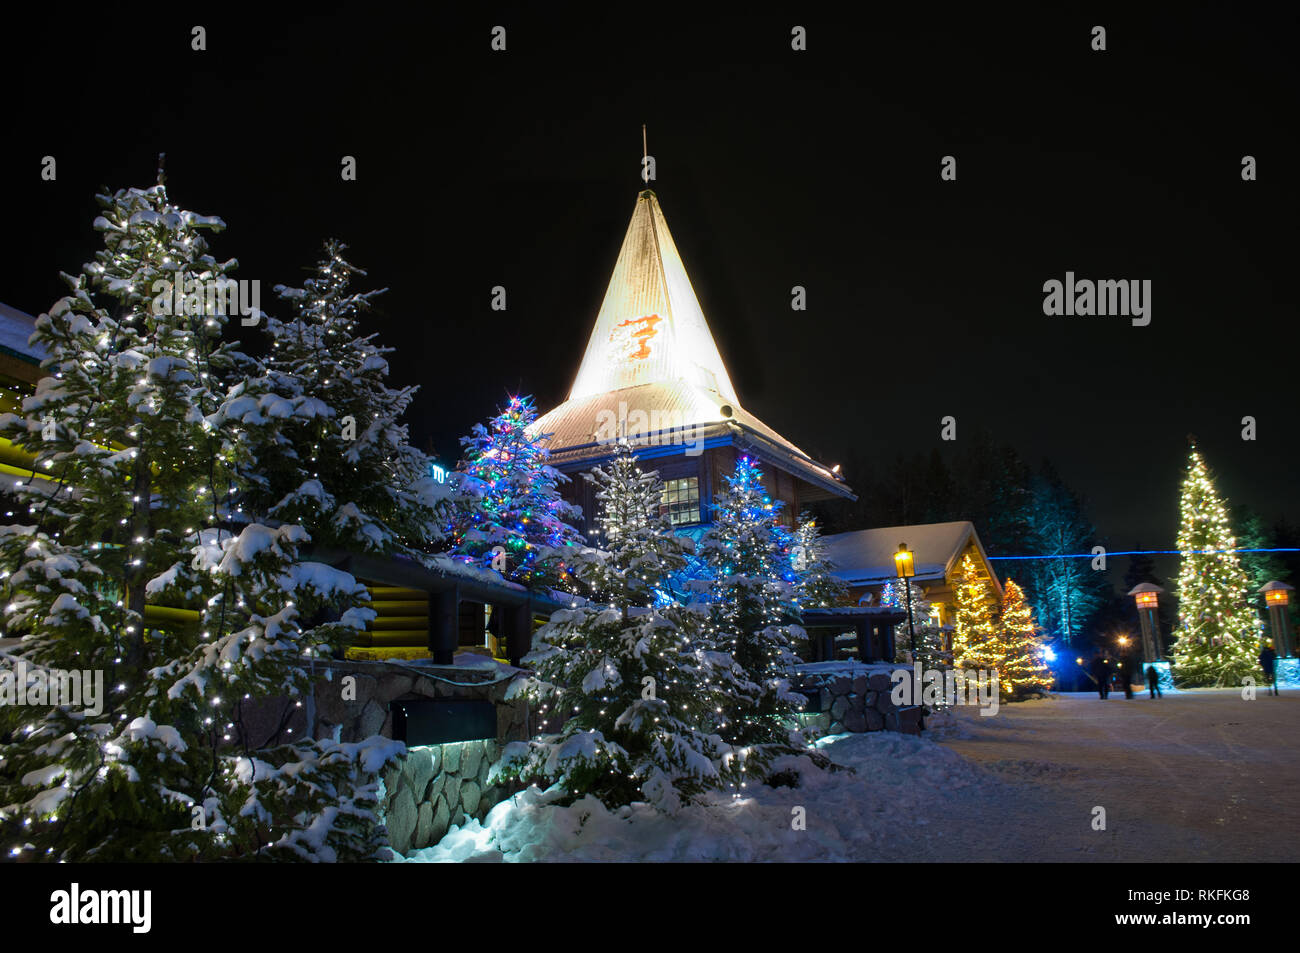 Santa Claus Village in Finland surrounded by Christmas trees Stock Photo